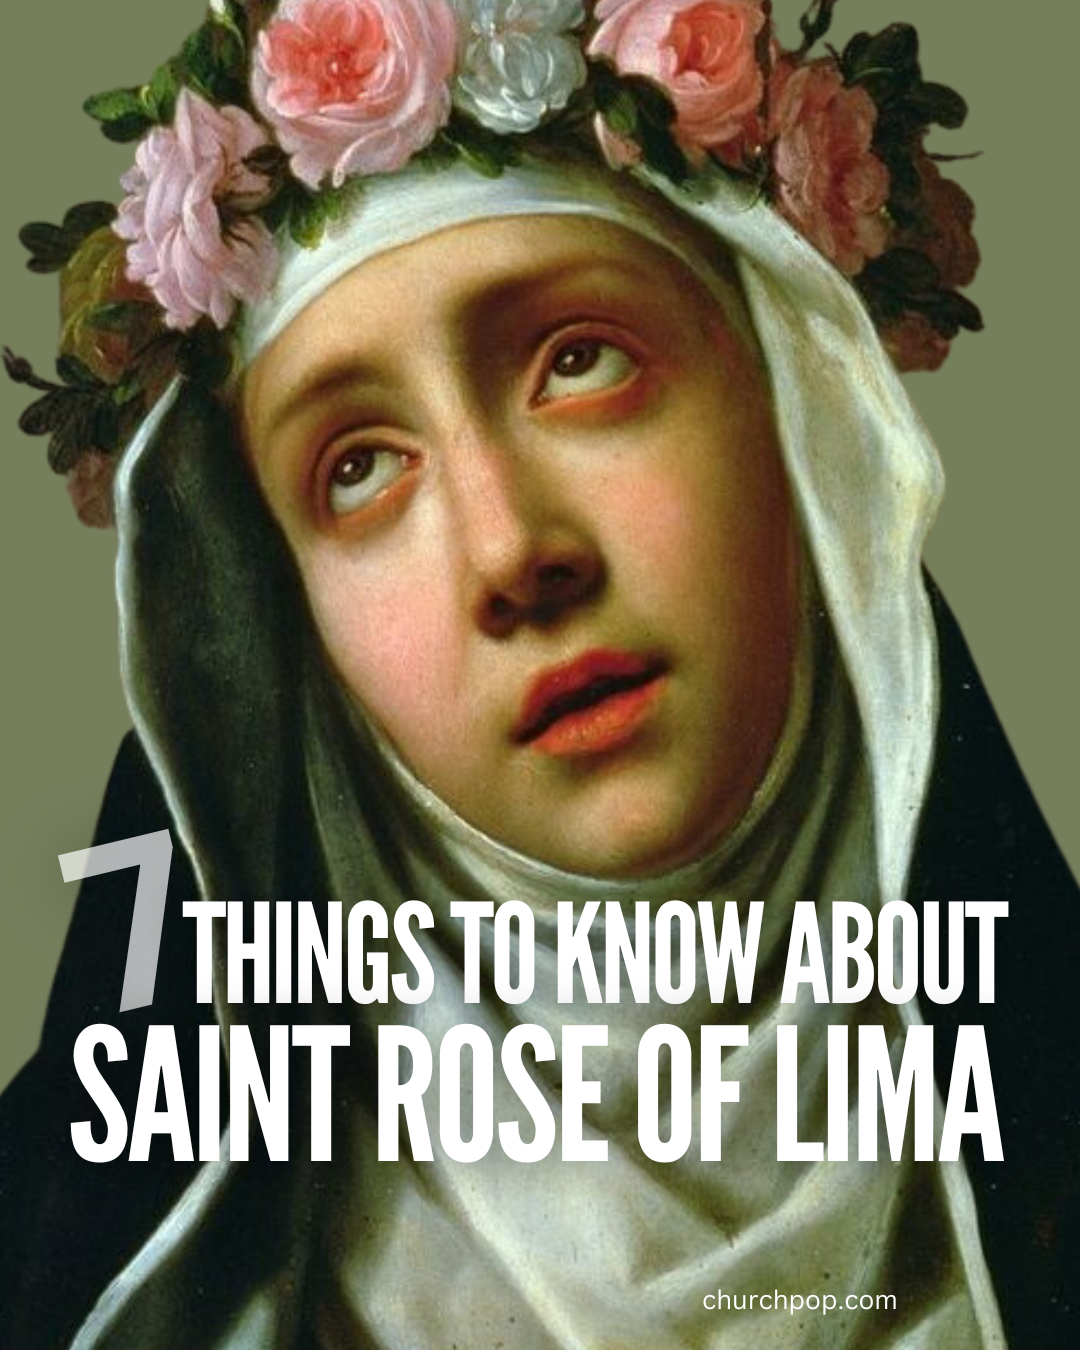 What is Saint Rose of Lima known for?